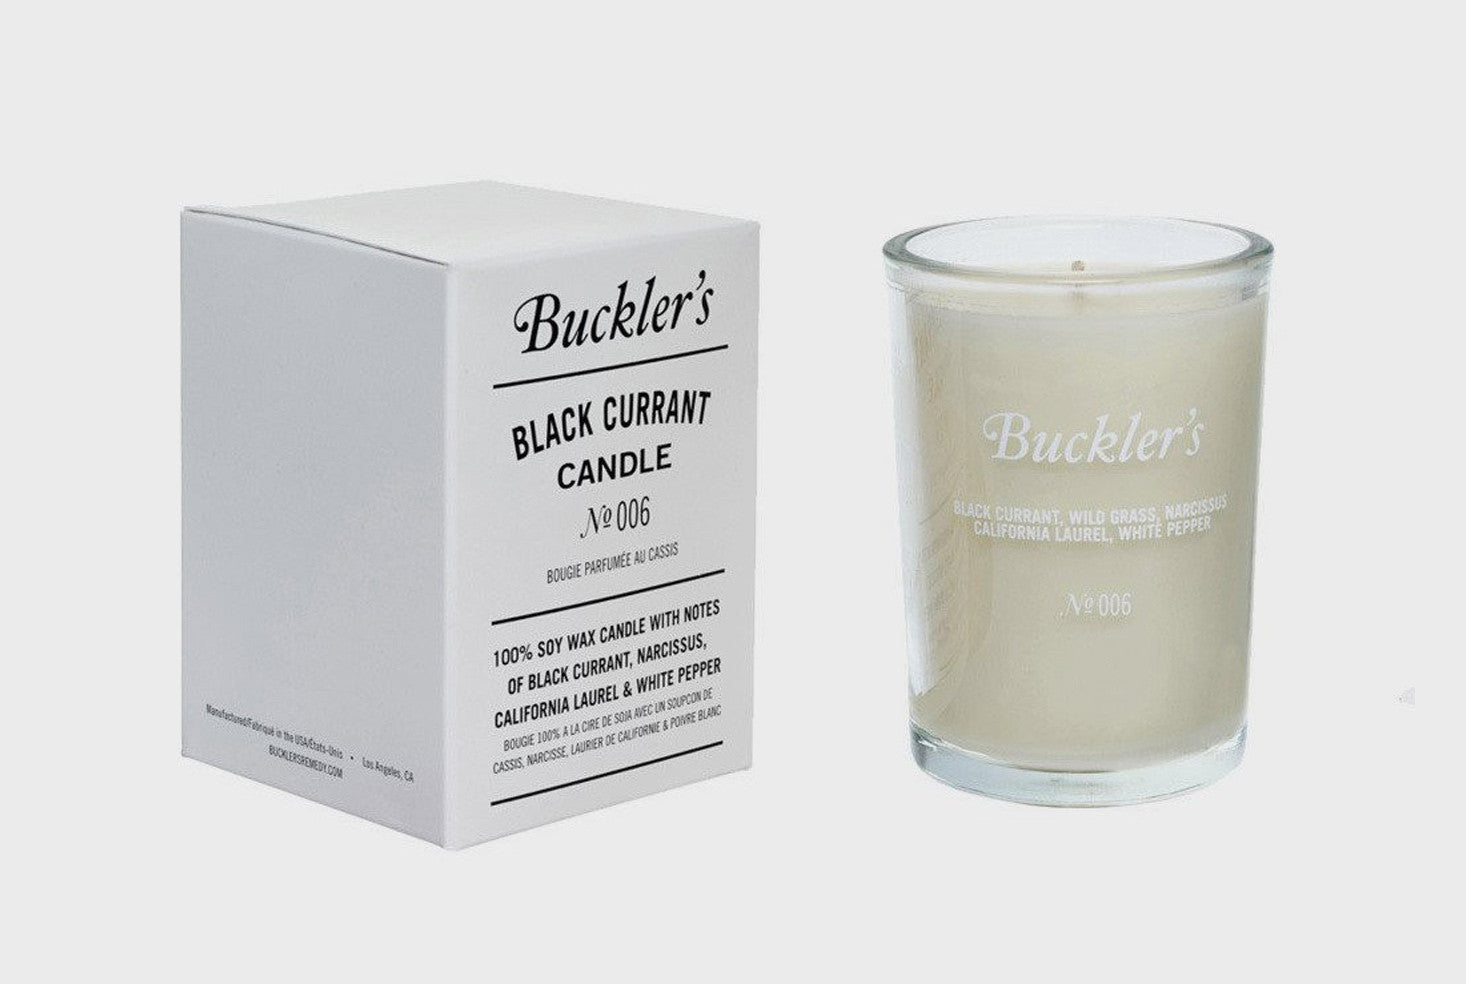 Introducing Buckler's Candles